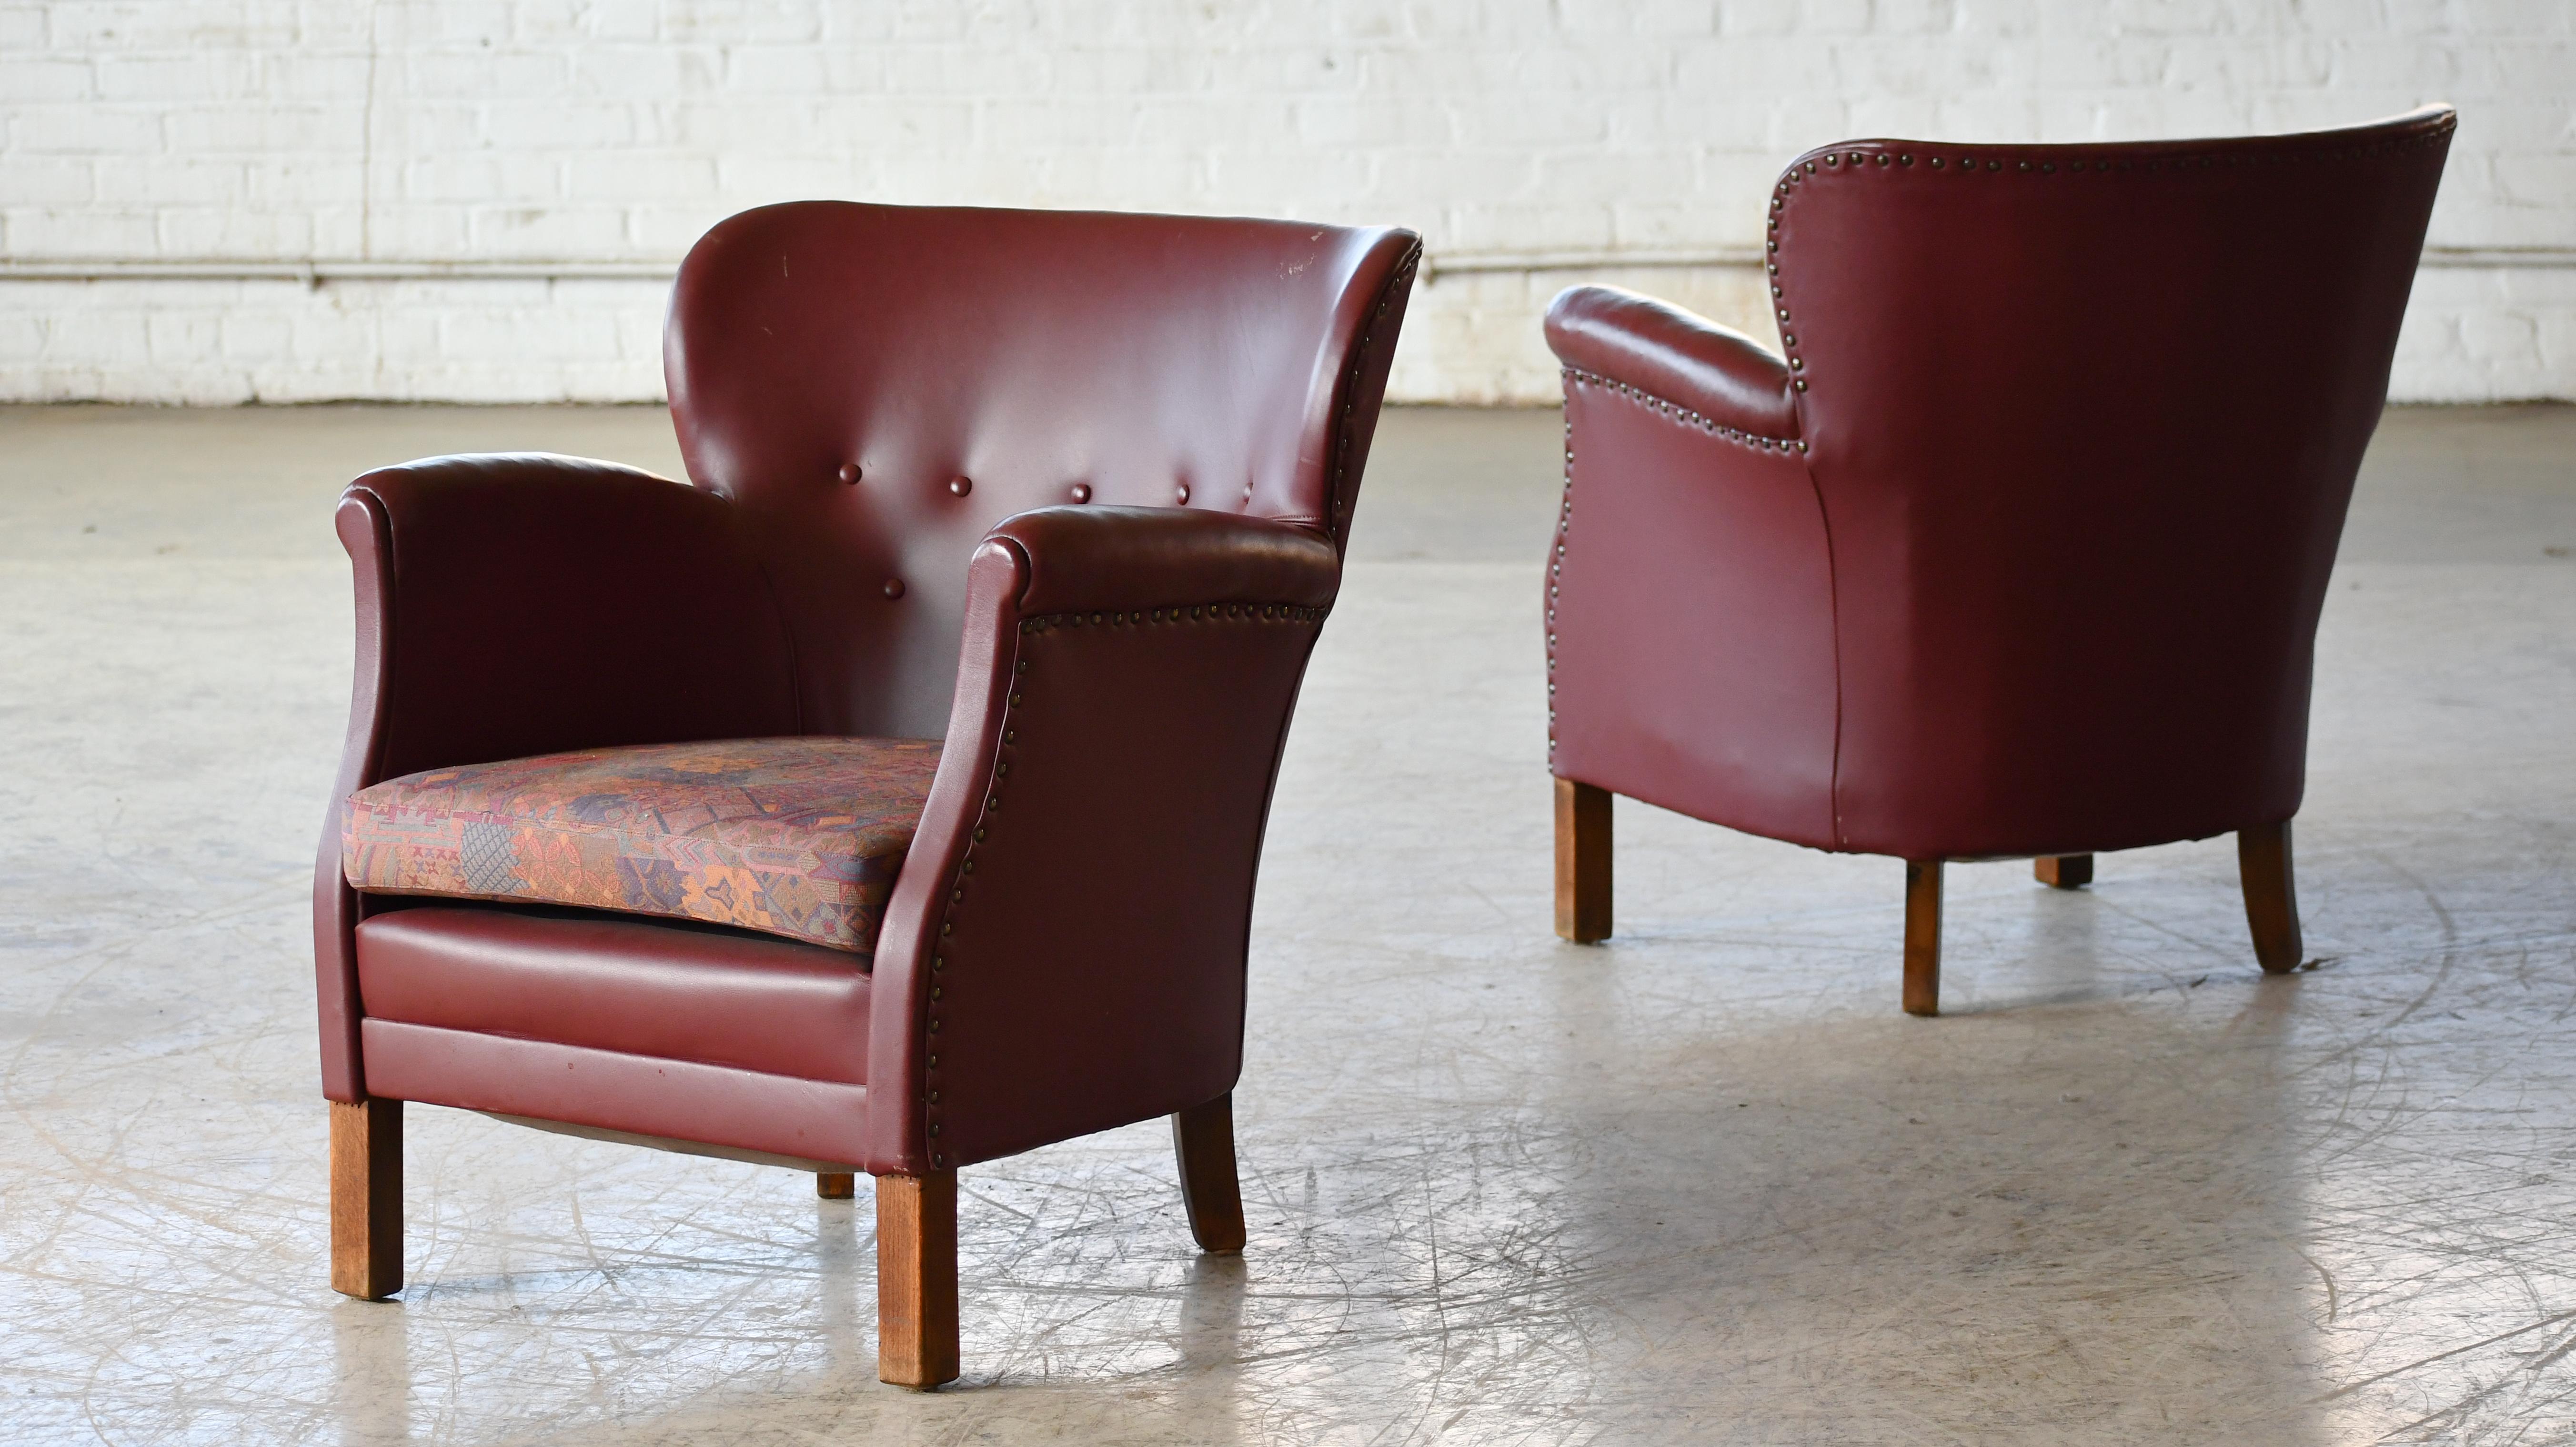 Charming pair of small scale Danish club chairs made around the 1930's to 1940's. The Danes called these smaller type chairs for 